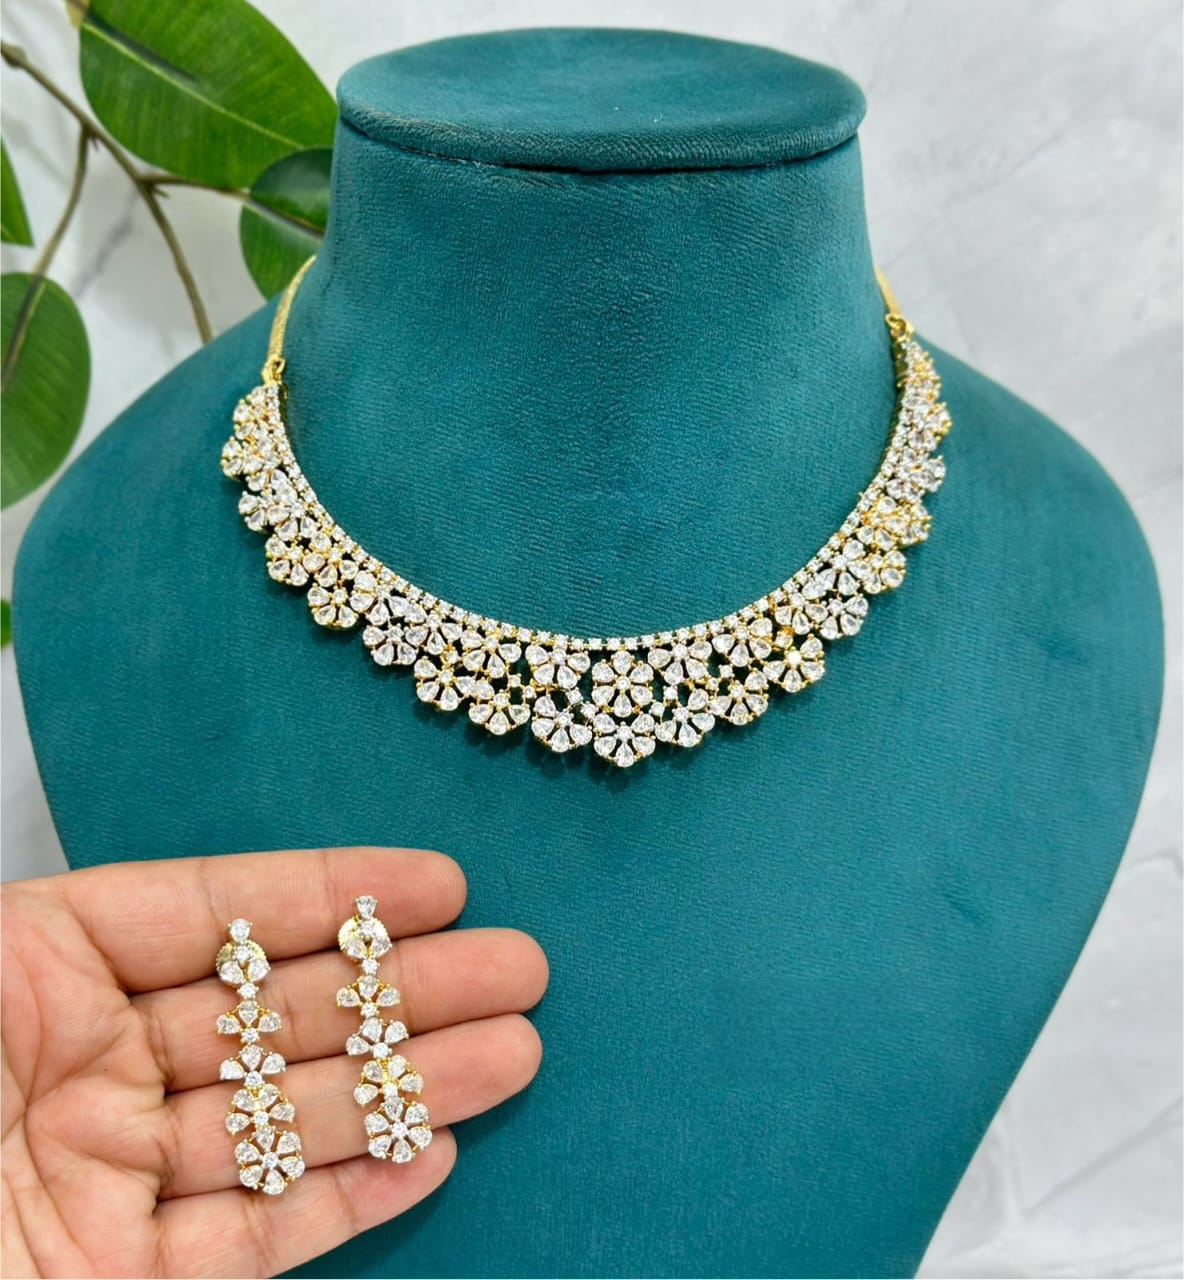 Elegant American Diamond Short Necklace with Matching Earrings Jewelry Set